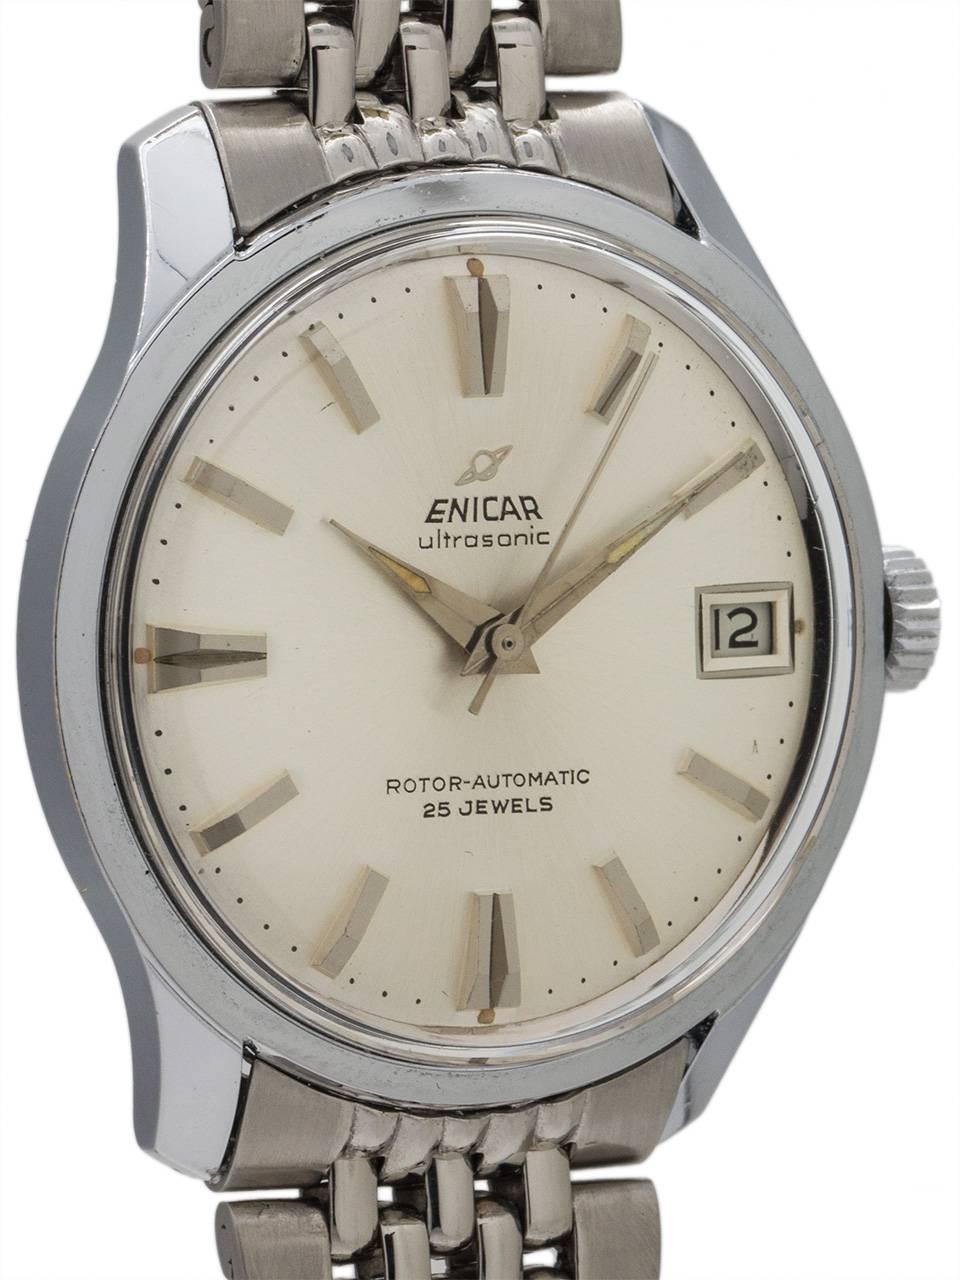 
Enicar stainless steel “ultrasonic” self winding ref 125/001 mid century design dress model circa 1960’s. Featuring mint condition 34 X 40mm case with contoured lugs with screw down caseback with engraved Enicar logo, acrylic crystal, mint